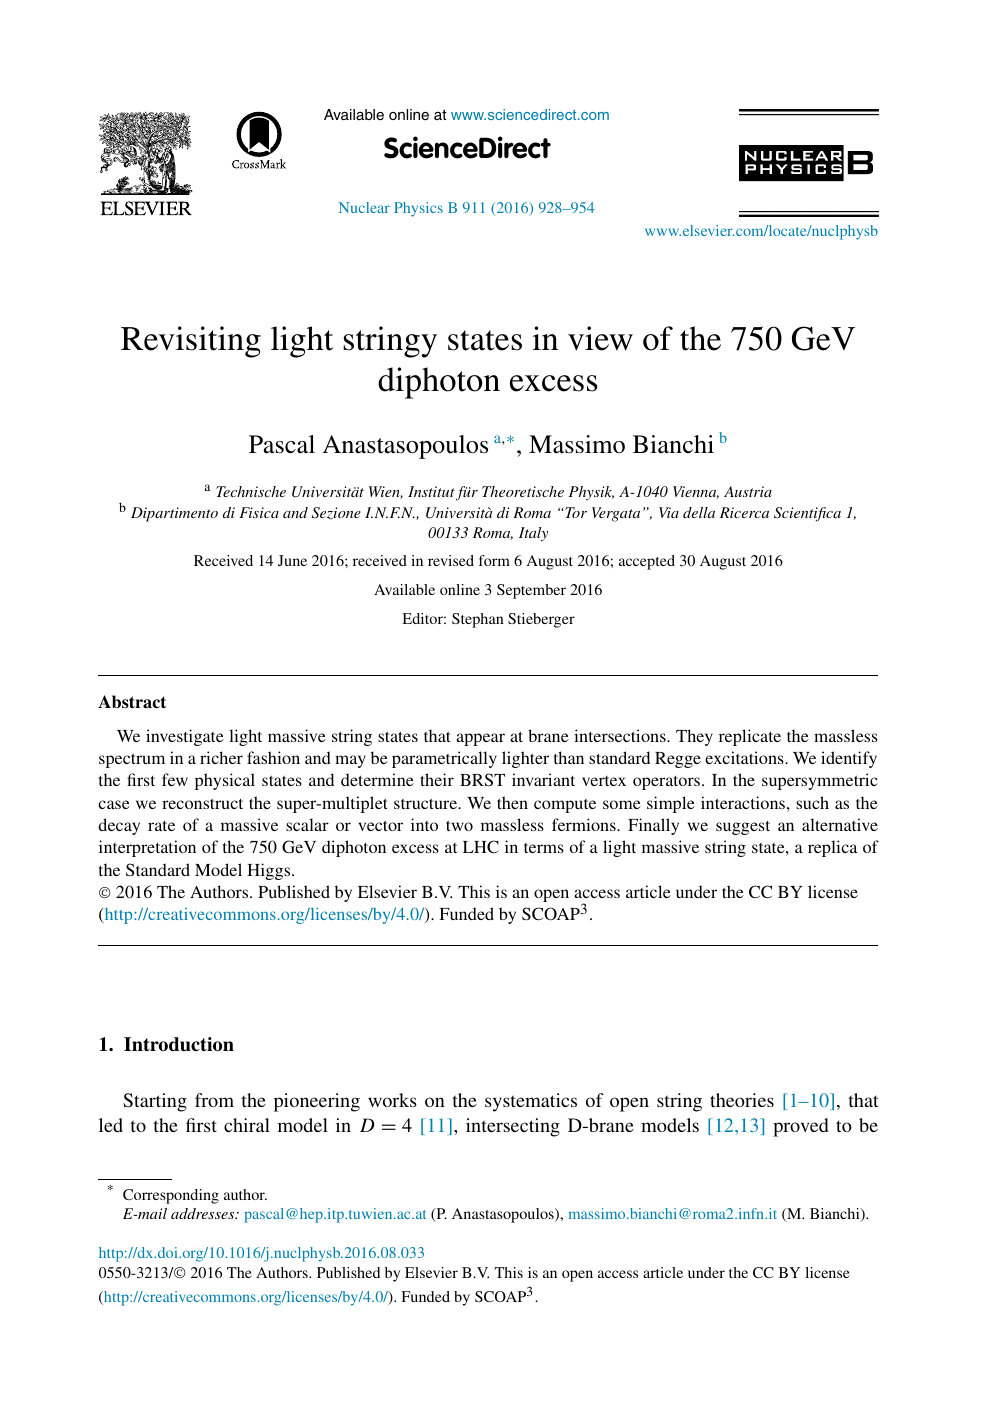 Revisiting Light Stringy States In View Of The 750 Gev Diphoton Excess Topic Of Research Paper In Physical Sciences Download Scholarly Article Pdf And Read For Free On Cyberleninka Open Science Hub